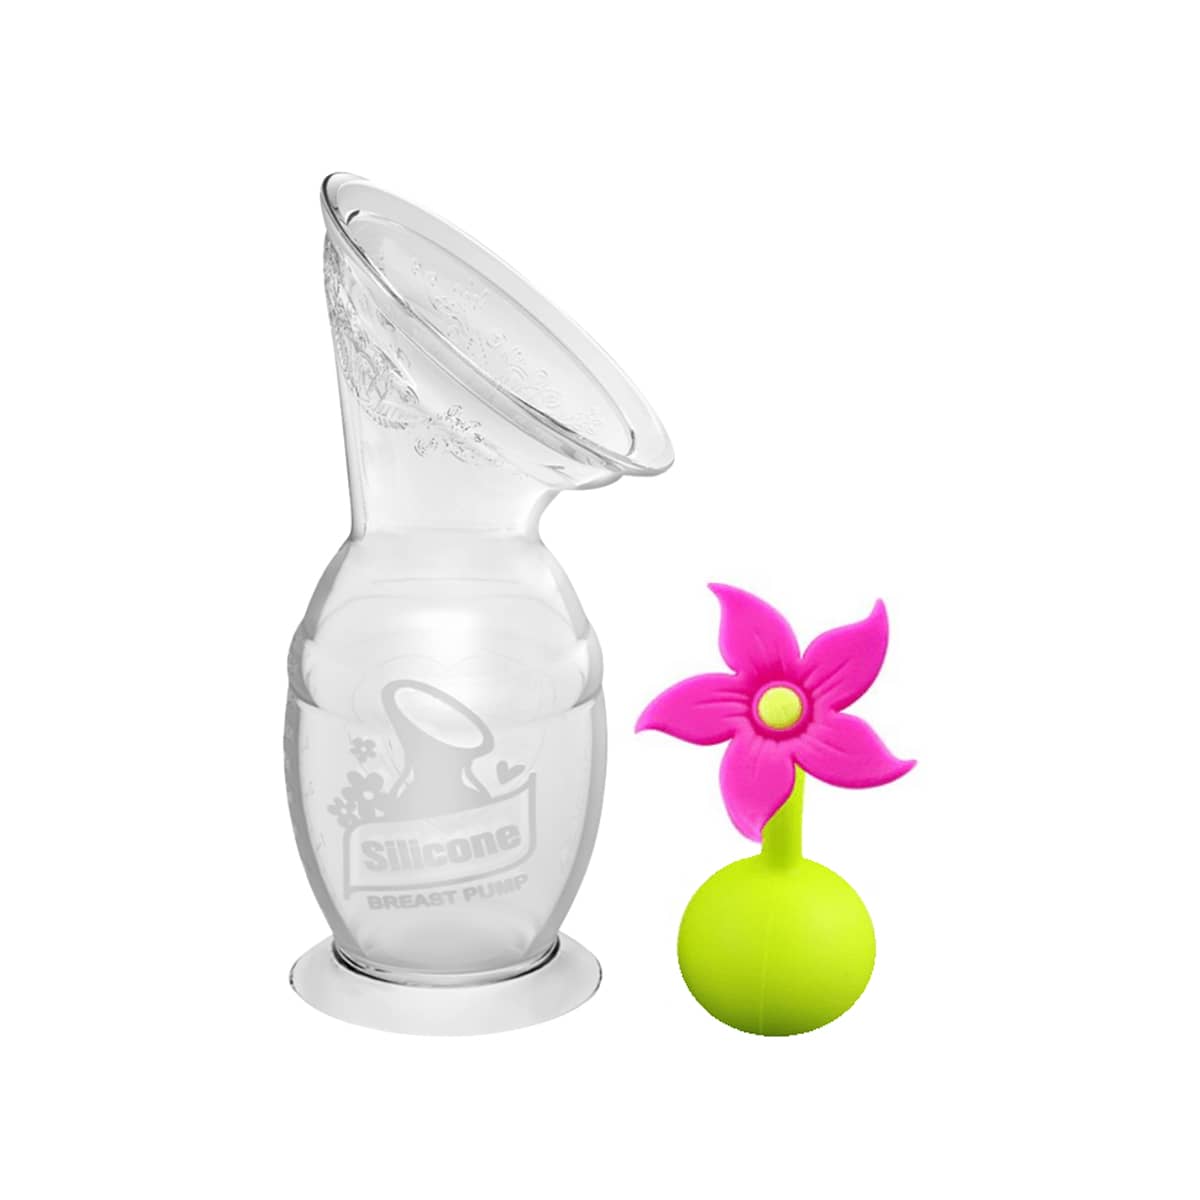 Haakaa Silicone Breast Pump with Suction Base and Flower Stopper - Pink